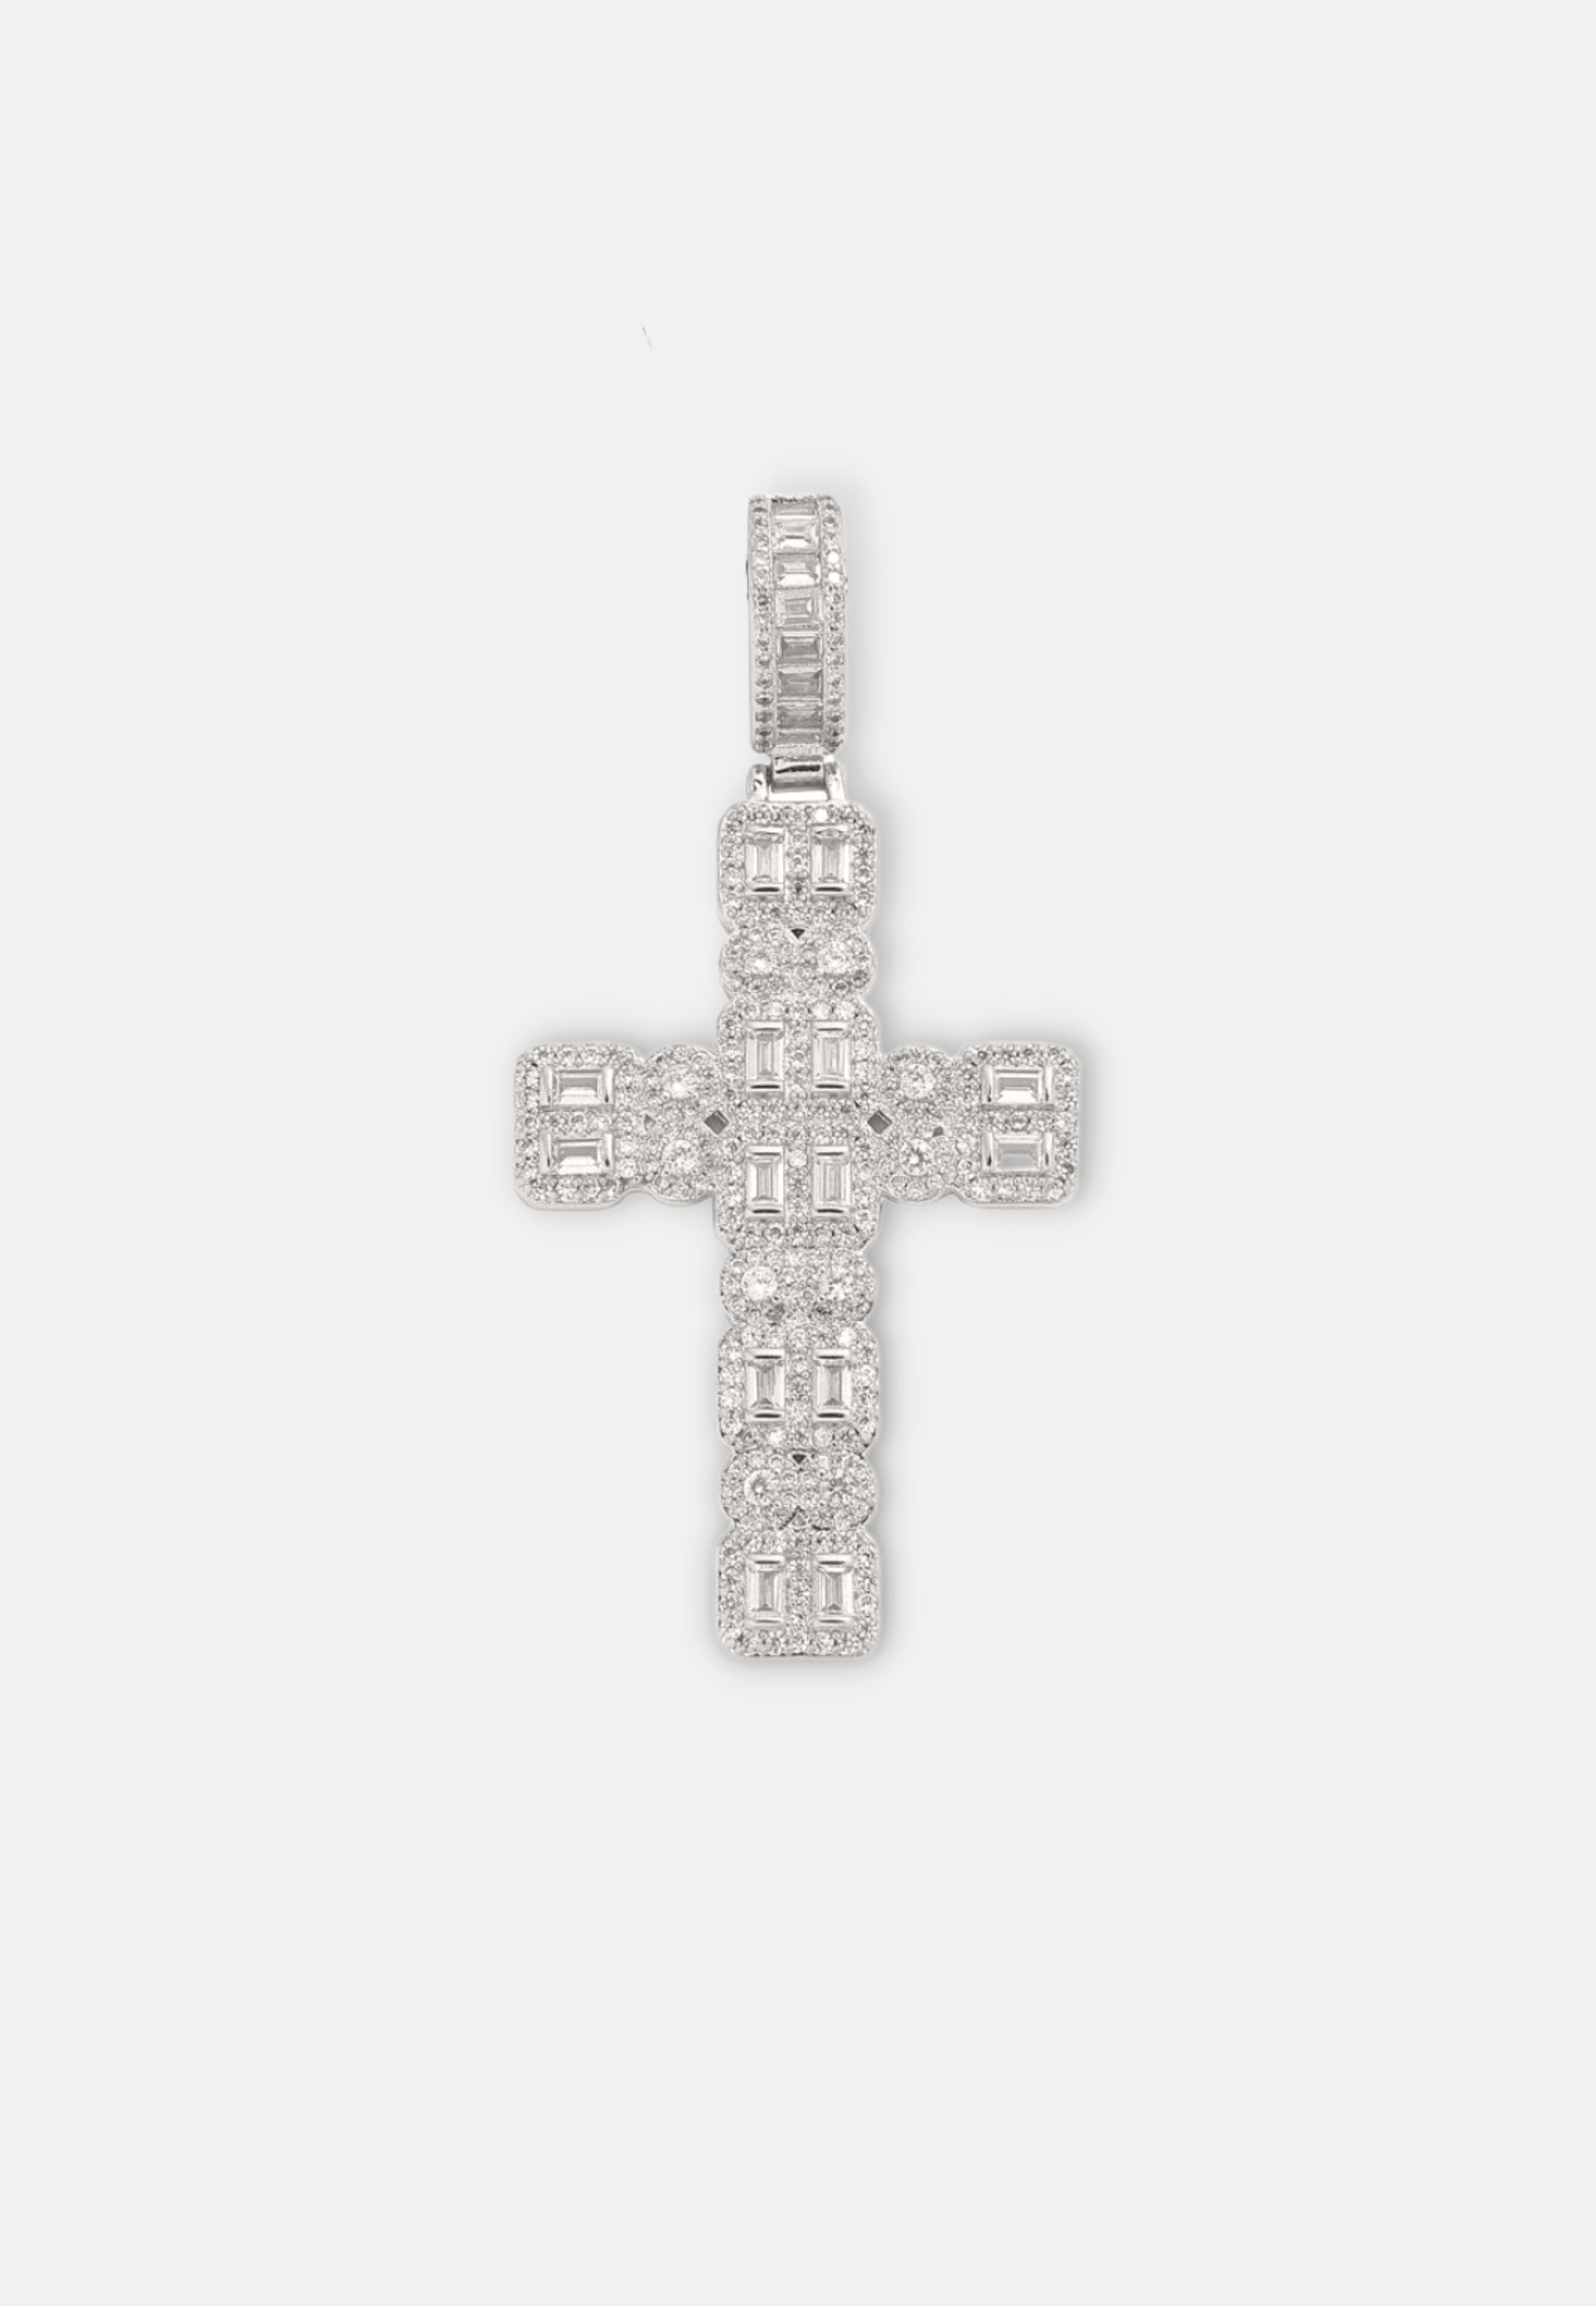 Hillenic Silver Iced Mixed Cross Pendant, absolute best seller in hip hop jewelry industry